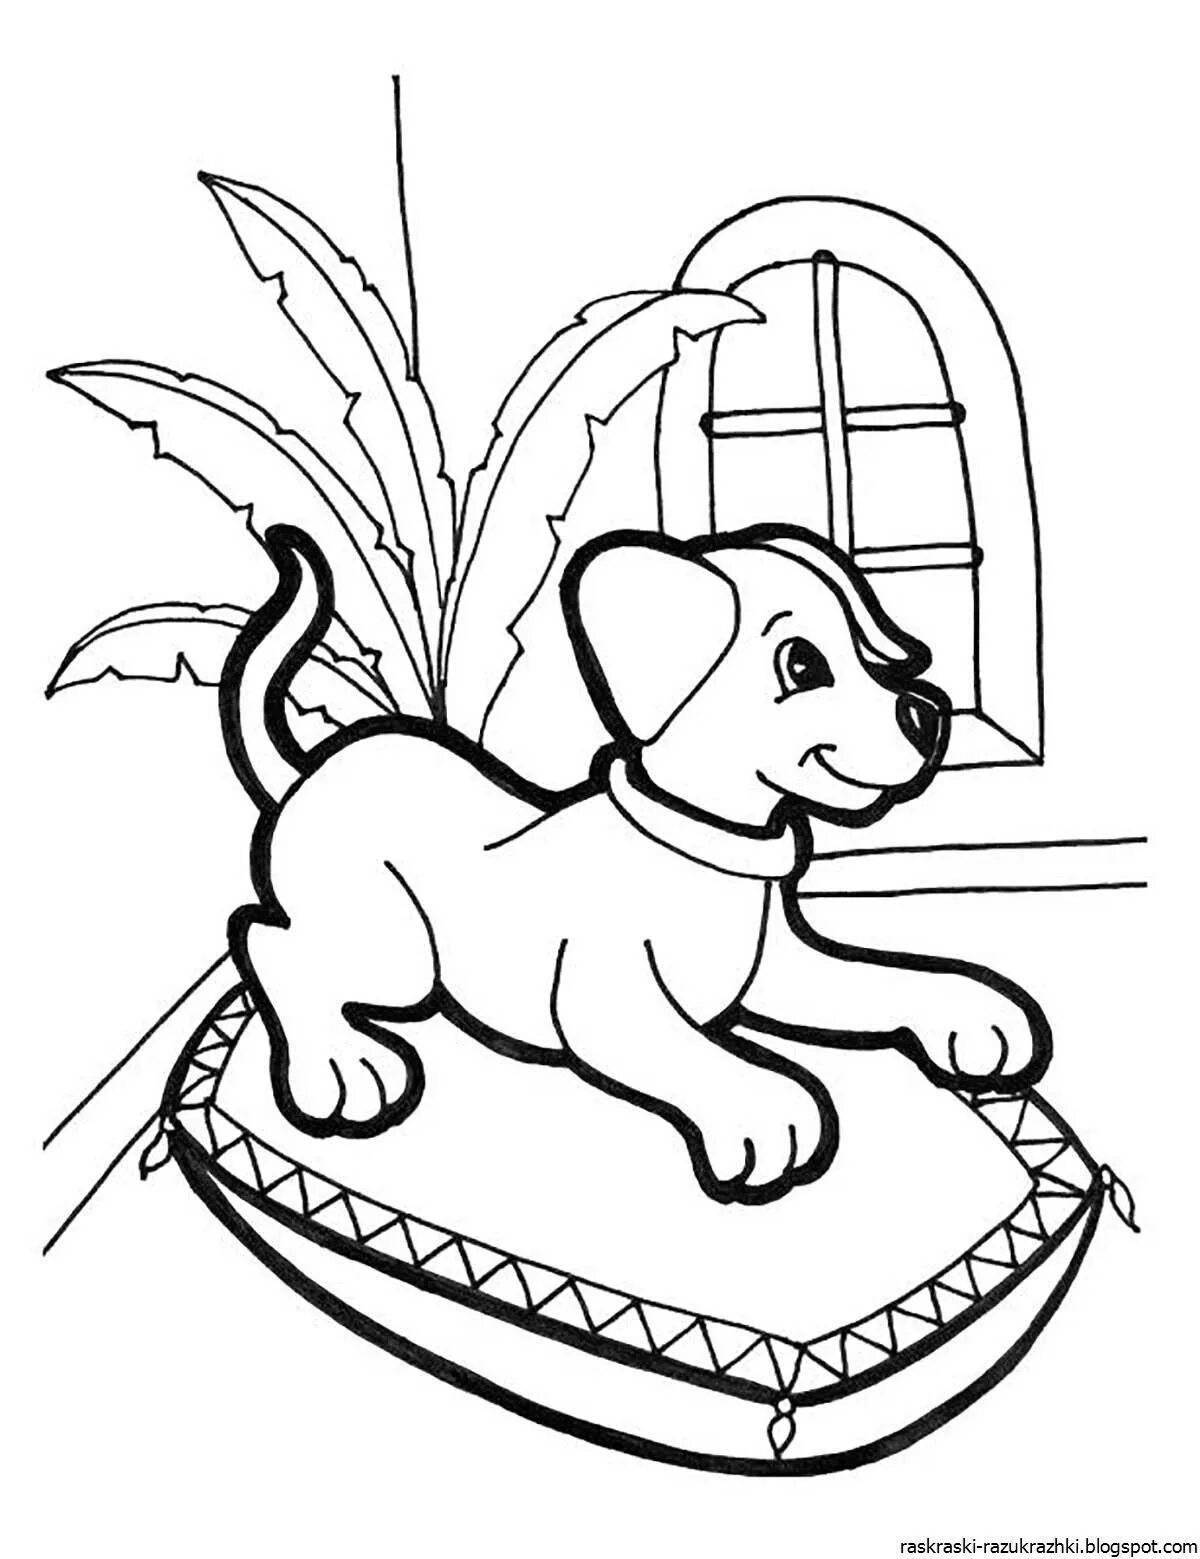 Fancy doggy kitties coloring book for girls